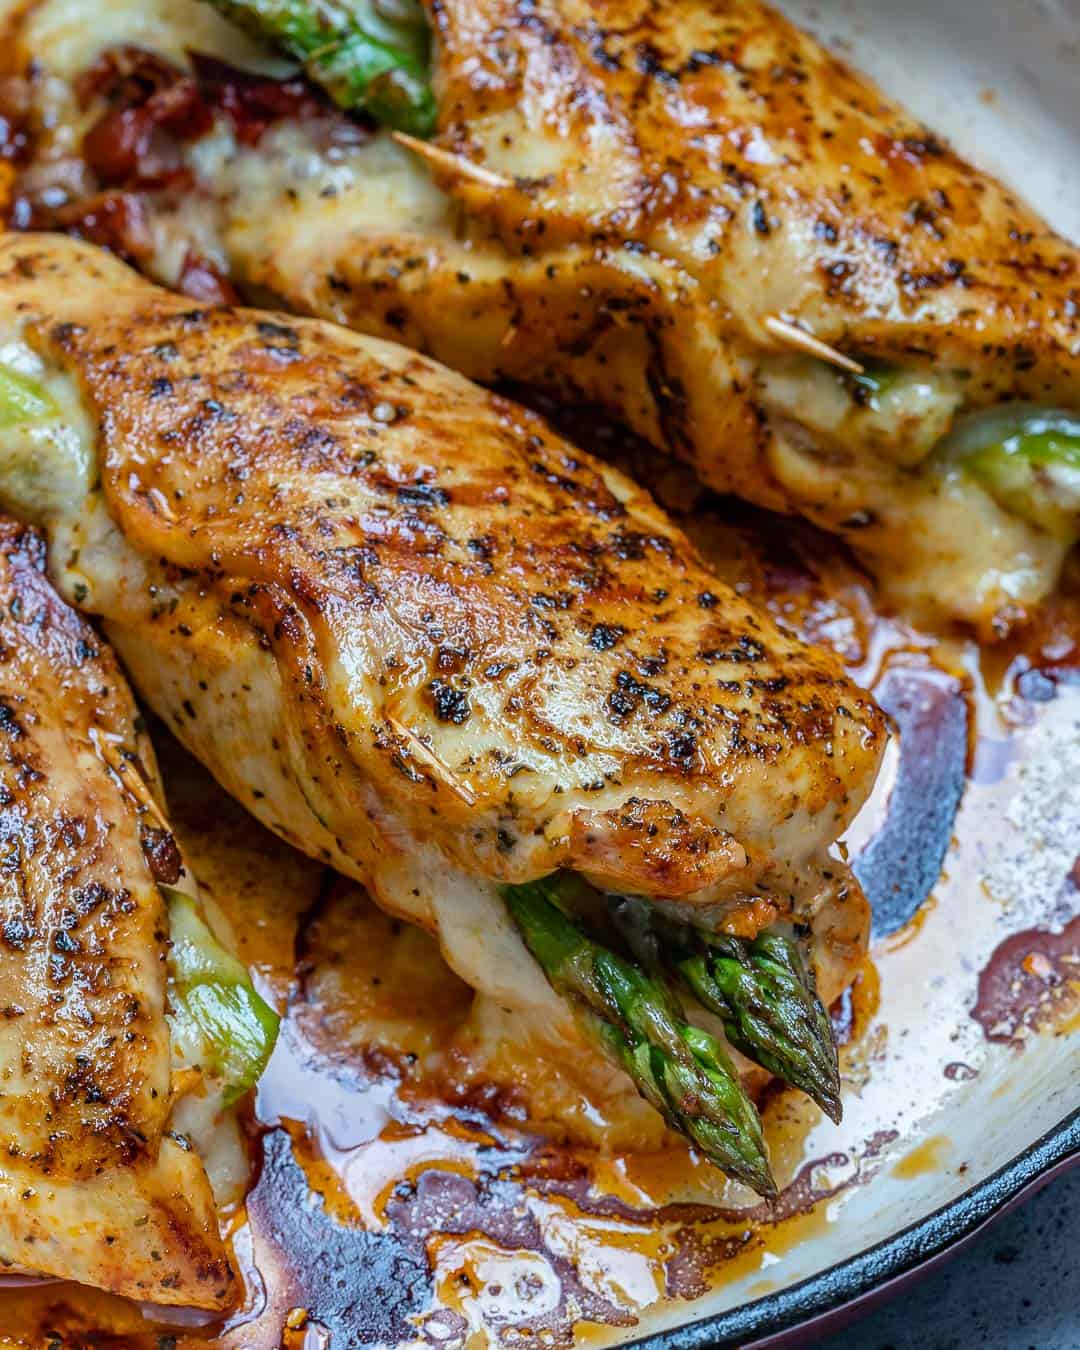 Easy Asparagus Stuffed Chicken Breast Recipe Healthy Fitness Meals,Lunches For Kids